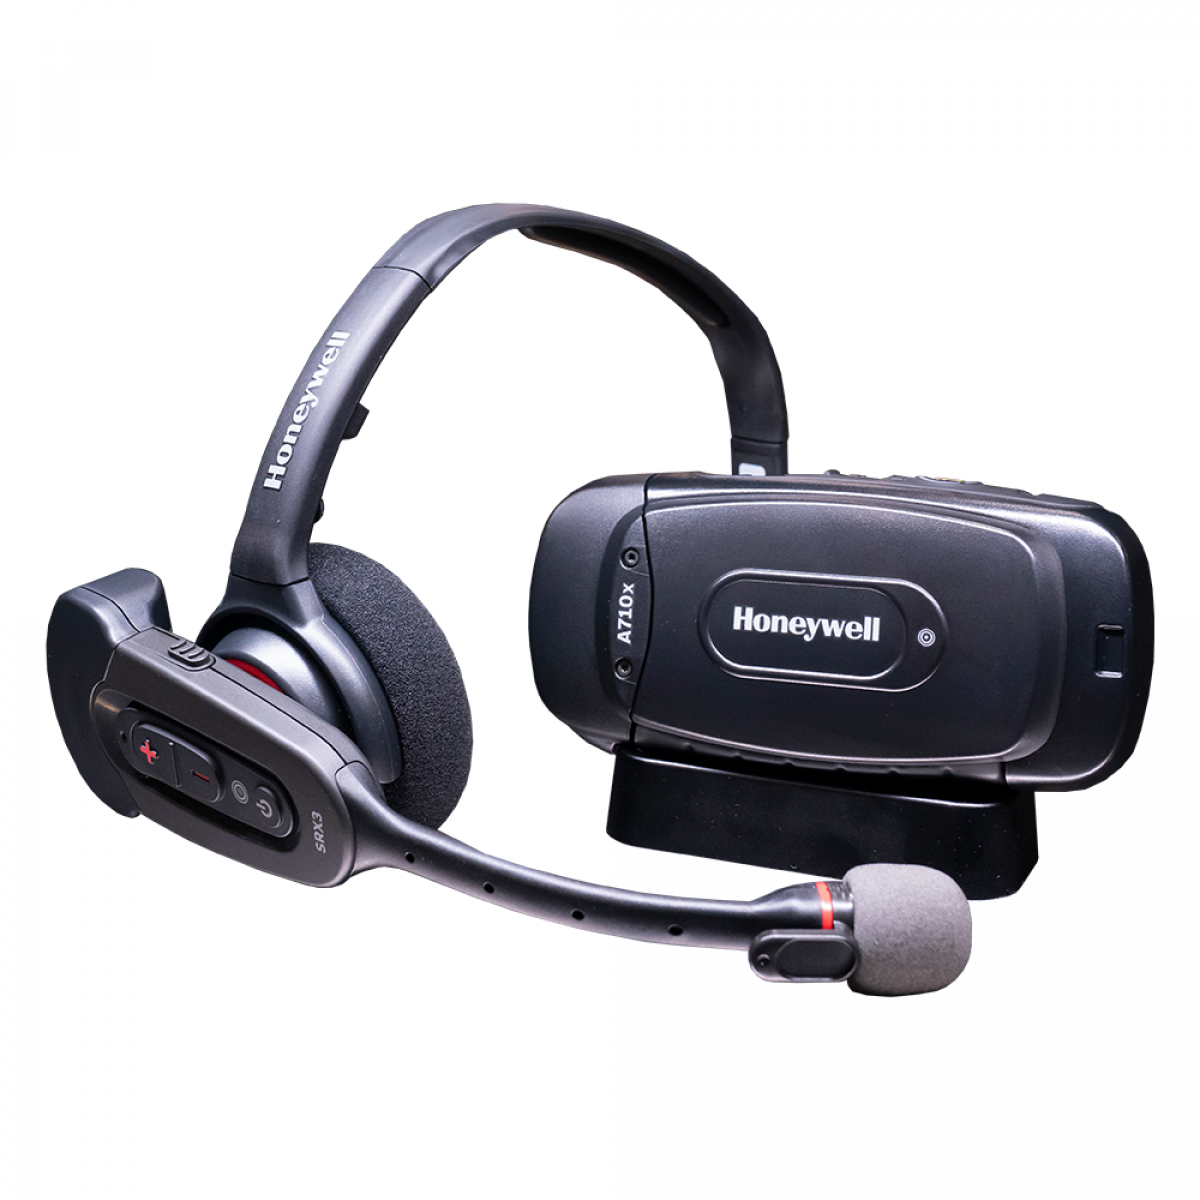 Honeywell Voice A710x computer with dock and SRX3 headset